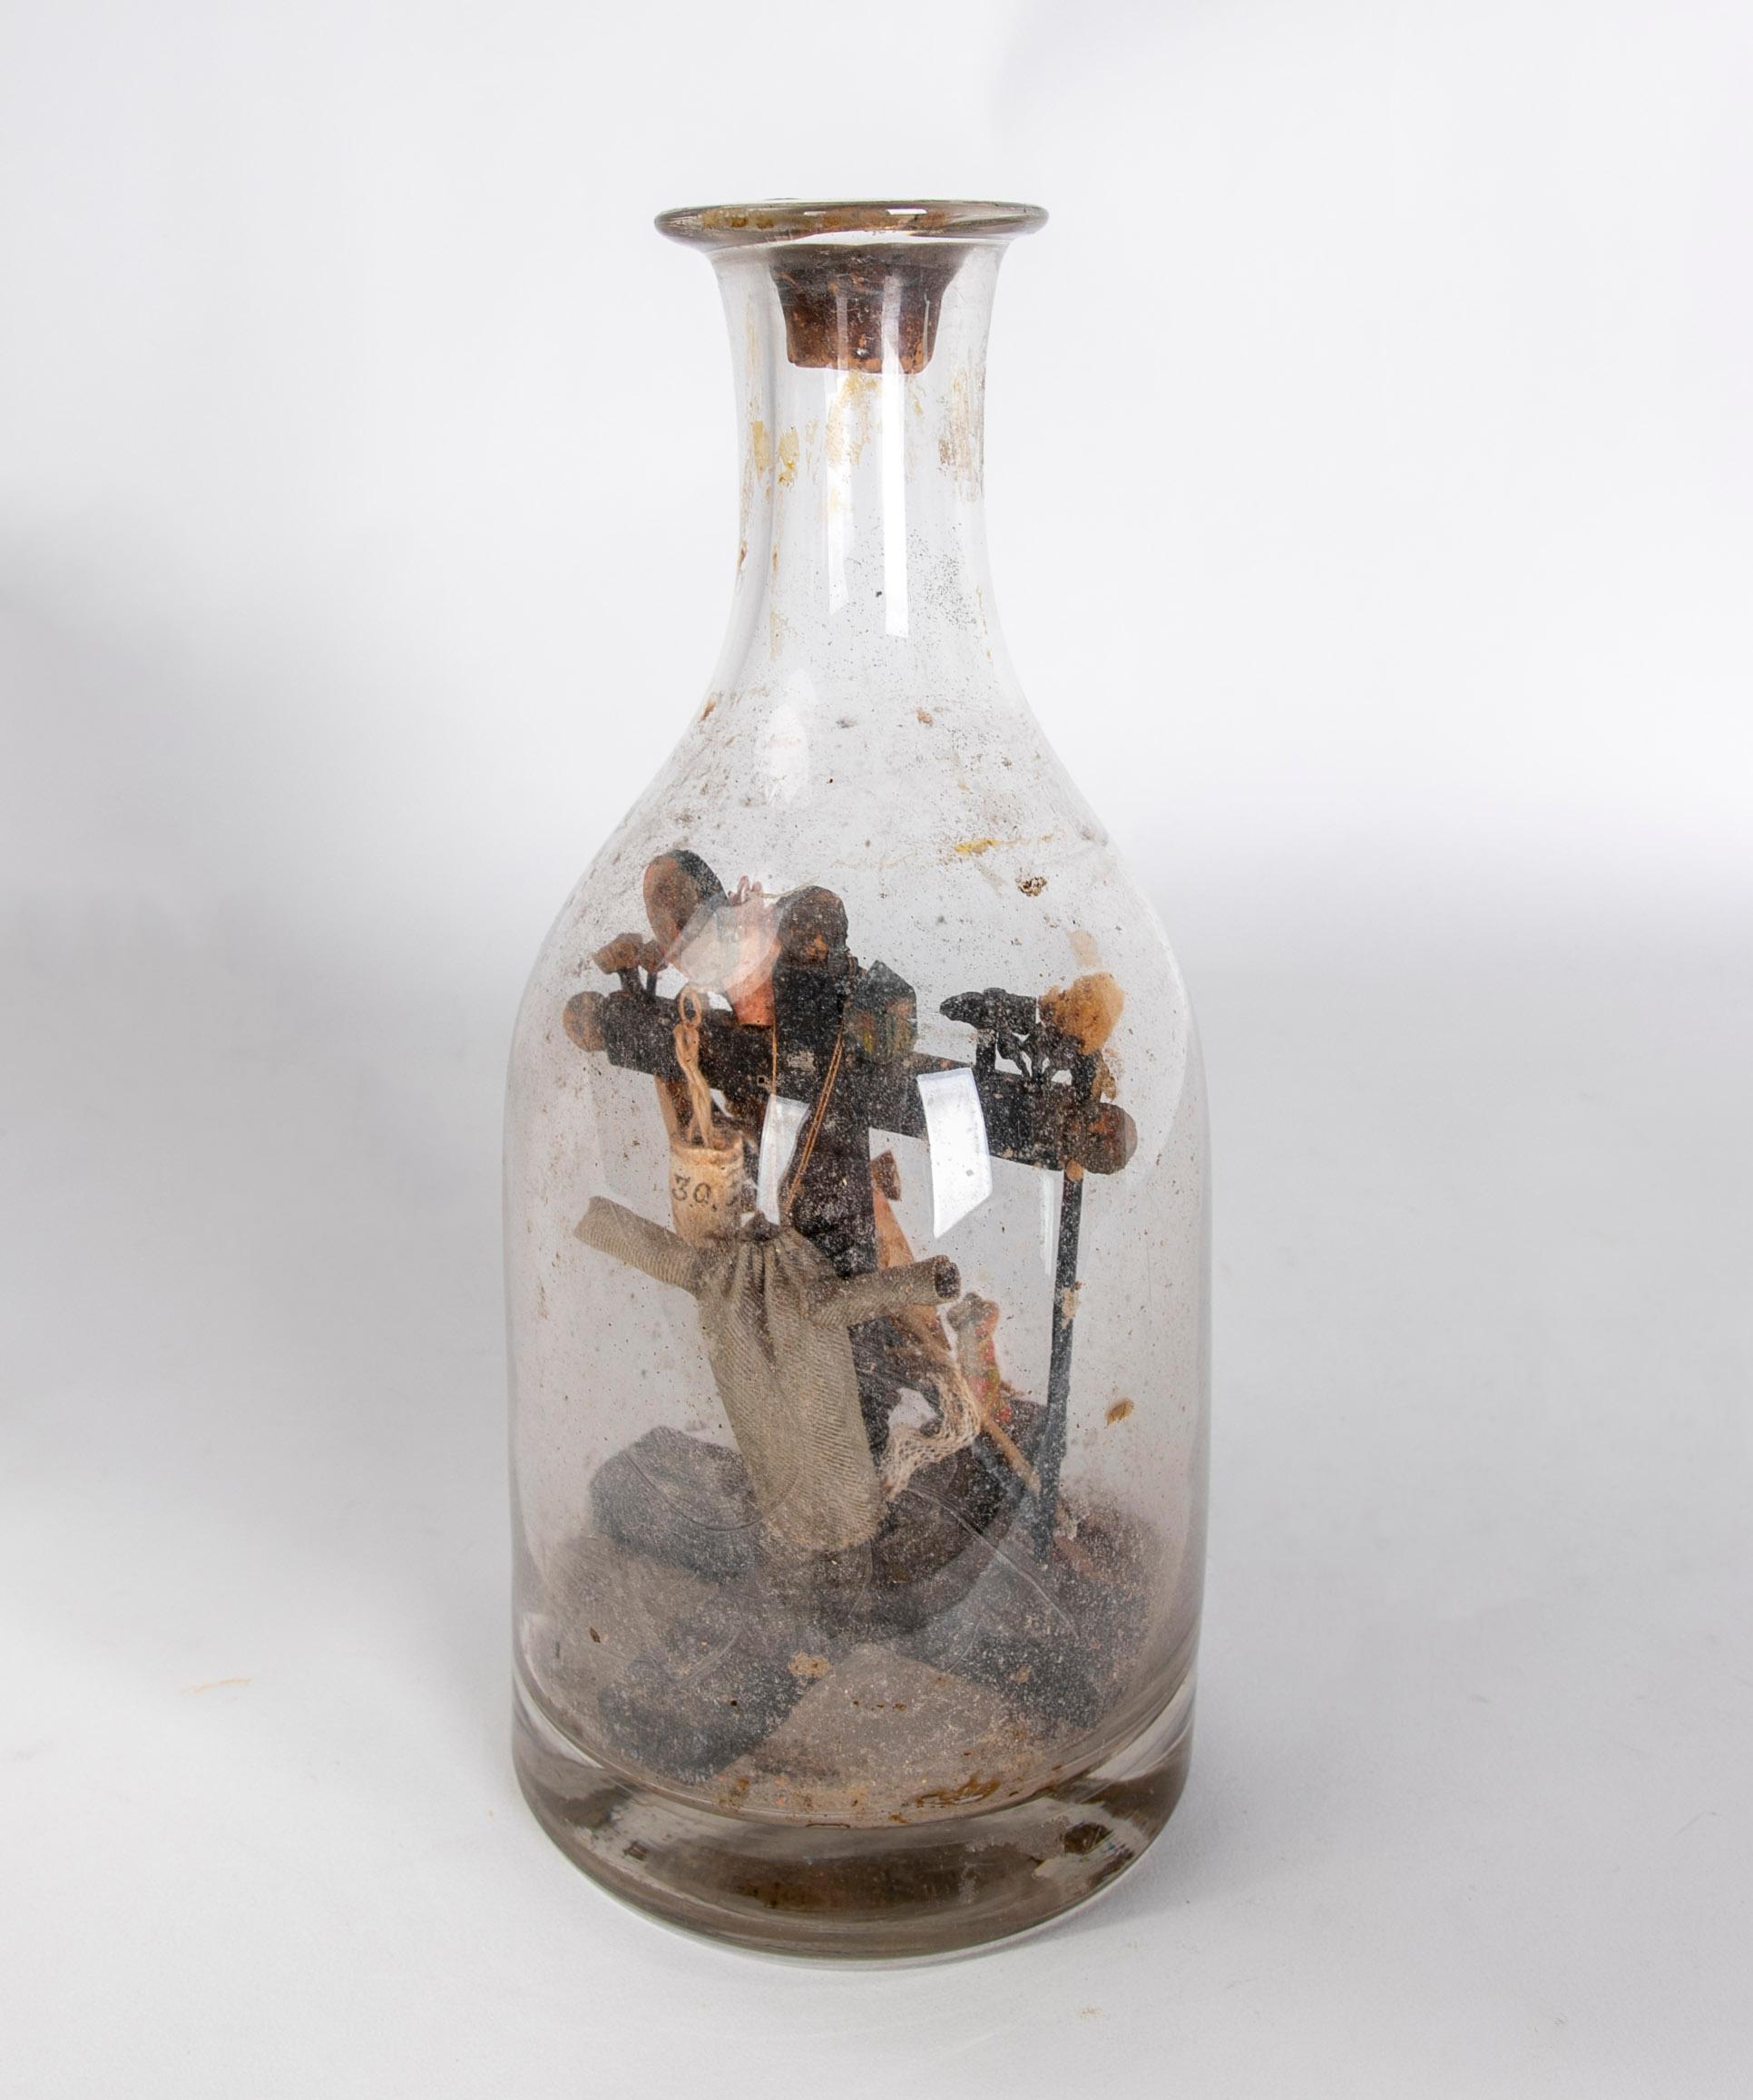 Spanish Reliquary Bottle with Religious Decoration on the Inside.